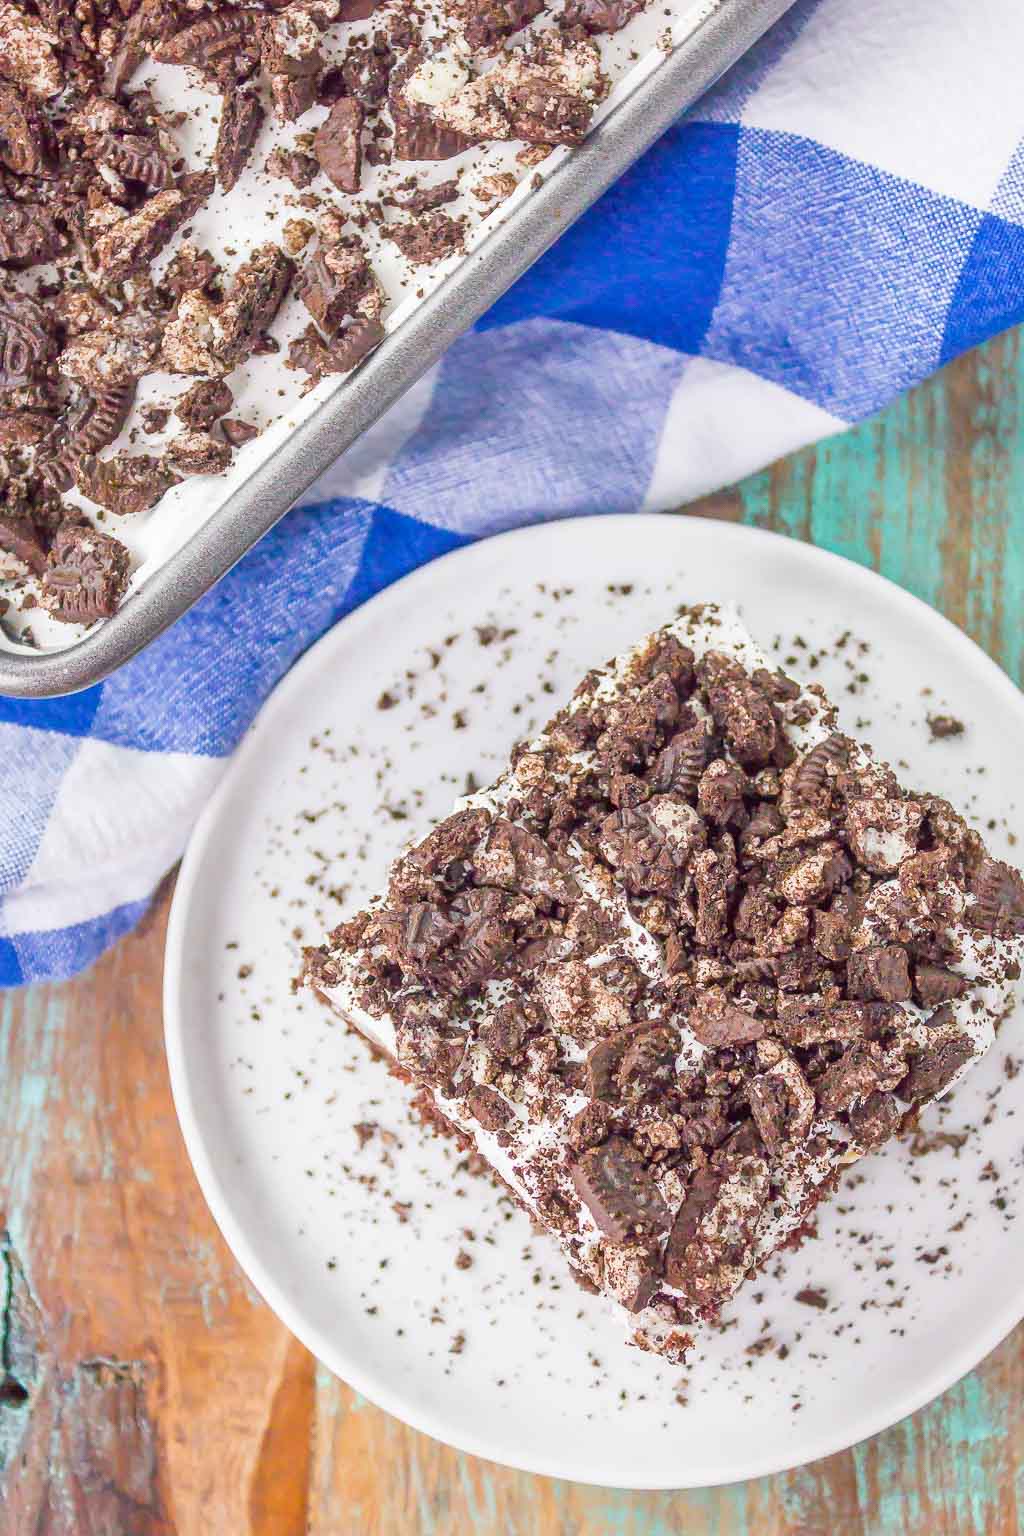 Oreo Pudding Poke Cake is chocolatey, fluffy, and simple to make. A fudgy cake is loaded with white chocolate pudding and studded with a creamy whipped topping and lots of Oreo cookies. The easiest, most delicious cake!